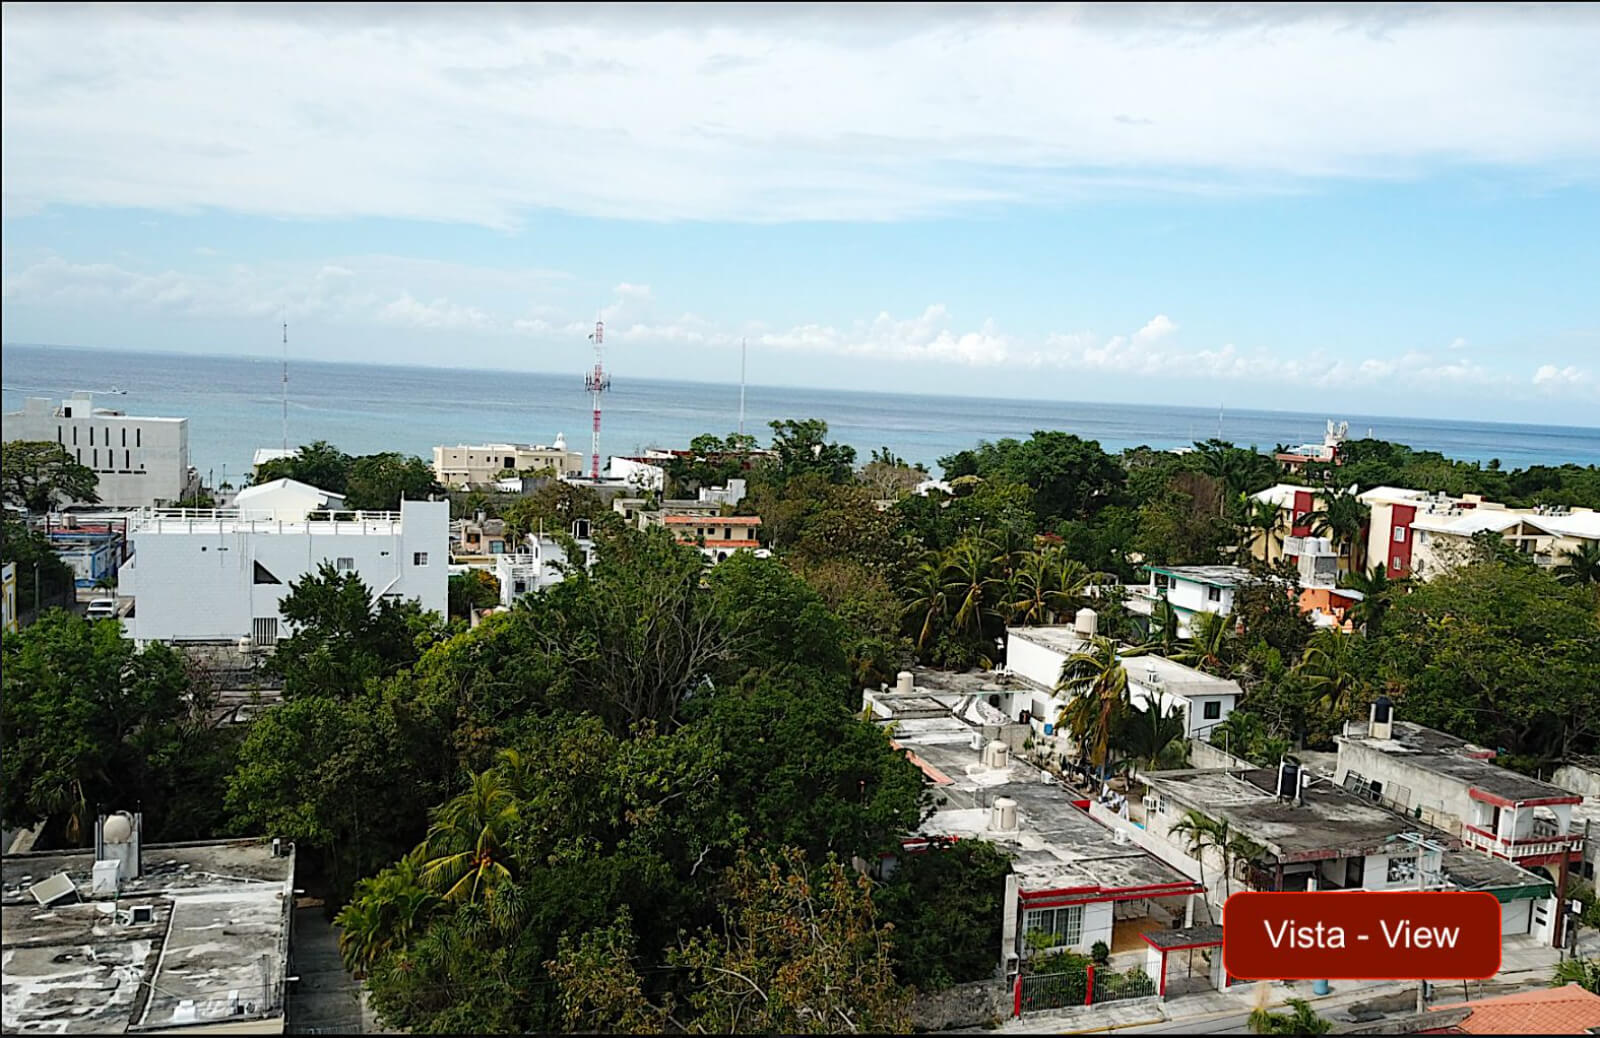 Apartment with roof top pool and grill area, hammock zone, palapa, pet friendly, pre-construction for sale in Cozumel